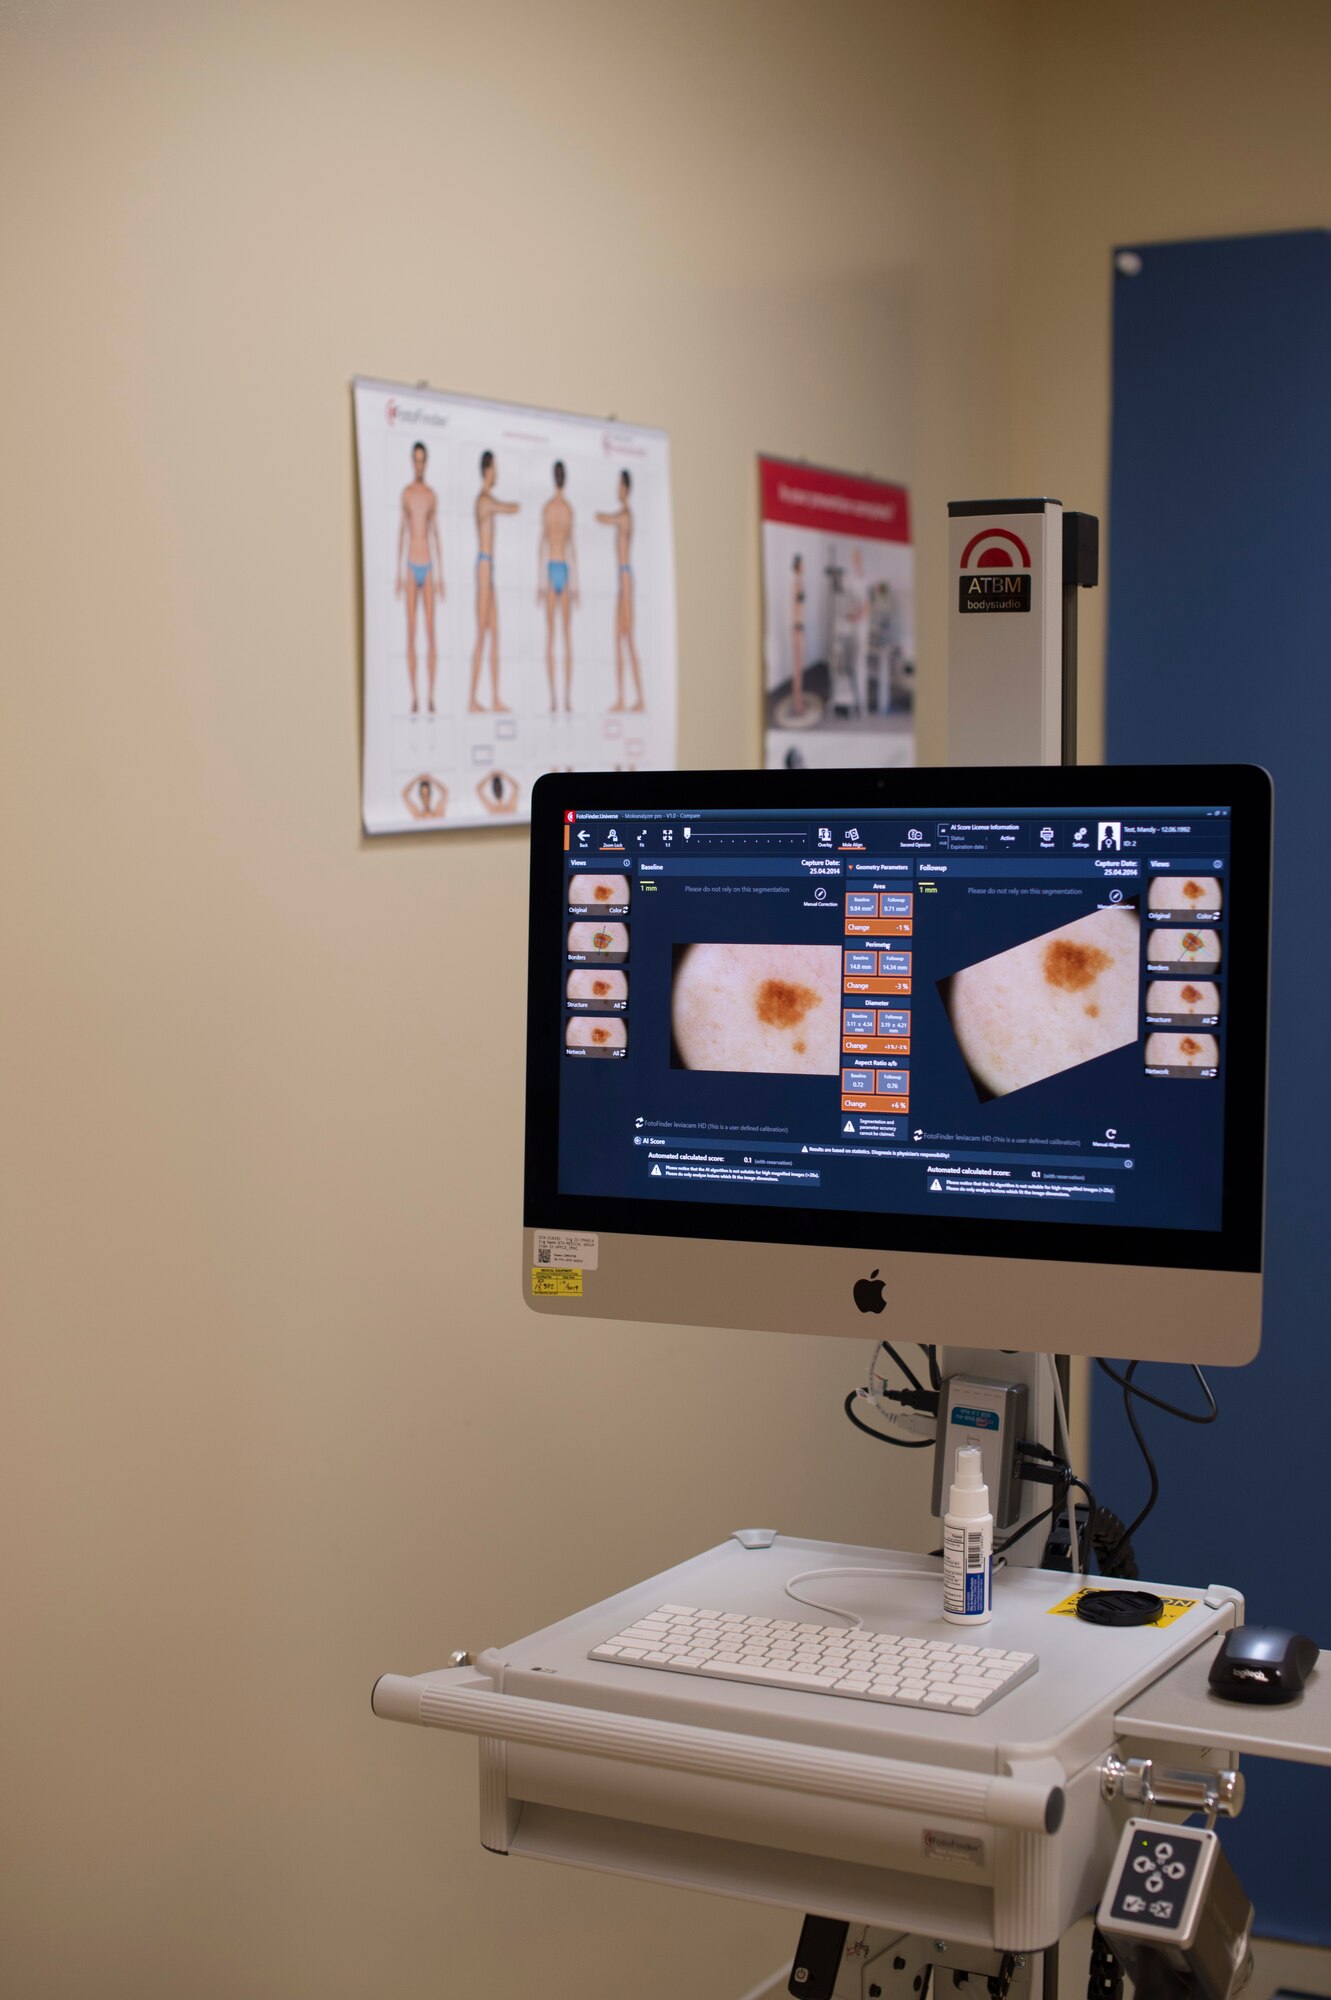 A dermatology body scanner displays an image of a test skin lesion at MacDill Air Force Base, Fla., Oct. 30, 2019. A new software upgrade allows a complex algorithm to scan an image captured with a camera and rate the severity of the spot for a dermatologist to review. (U.S. Air Force photo by Senior Airman Adam R. Shanks)